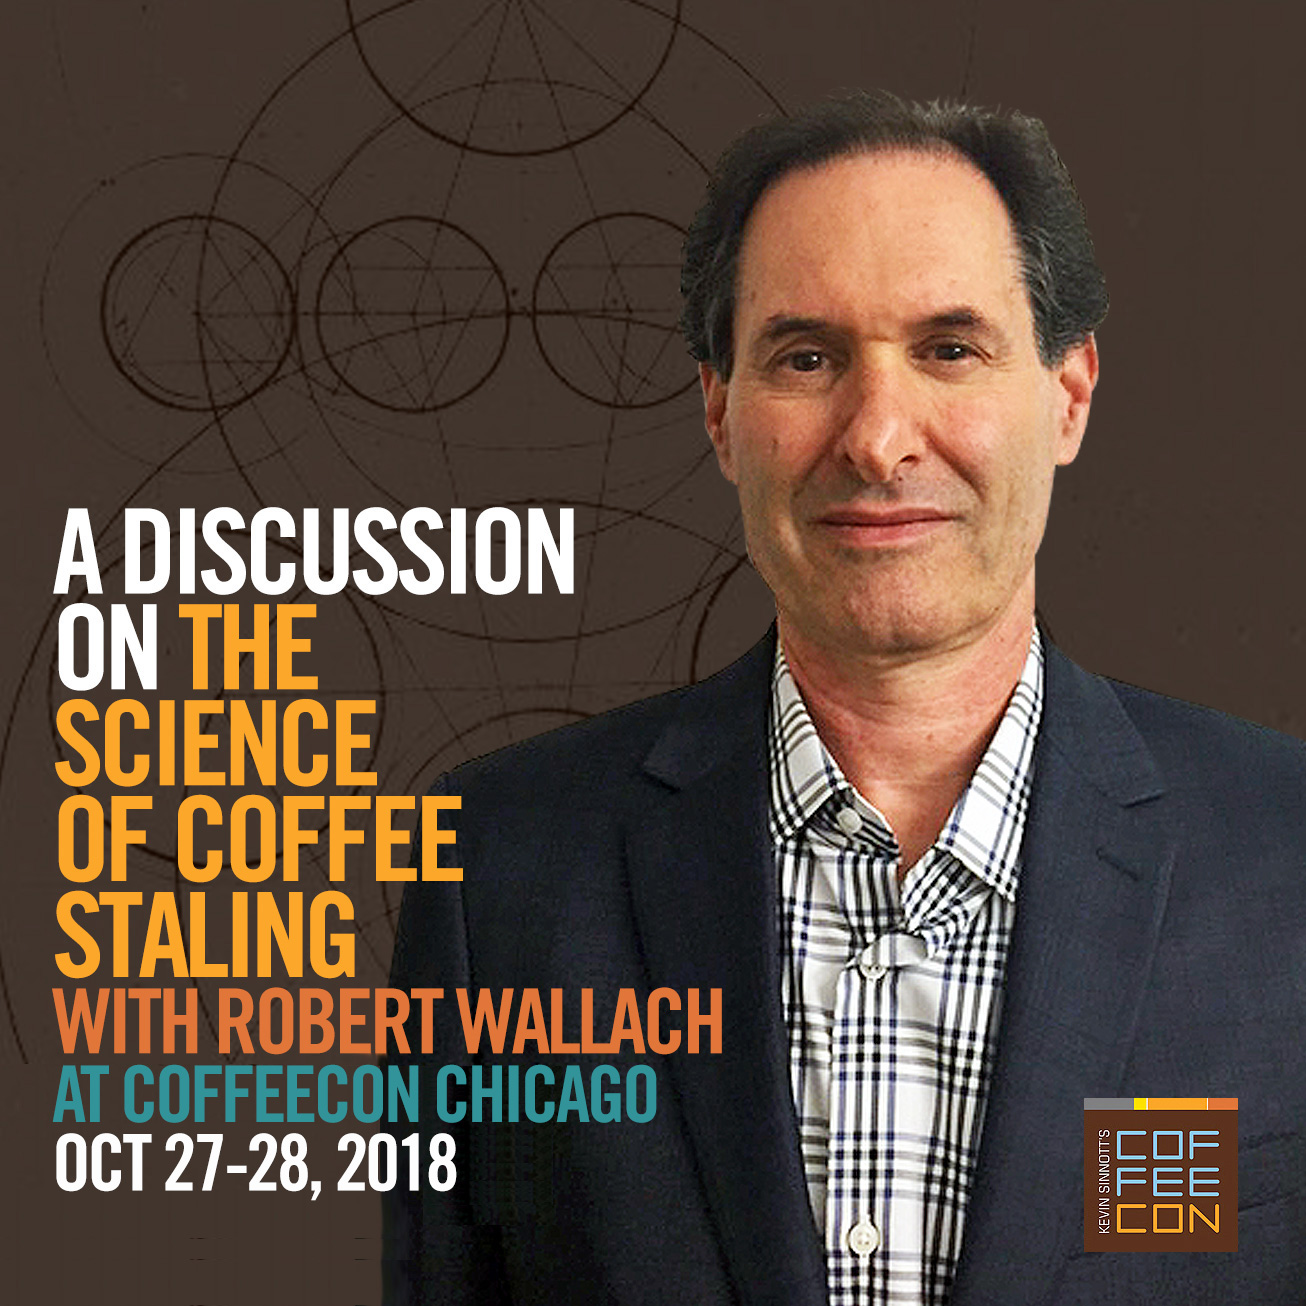 A Discussion on the Science of Coffee Staling